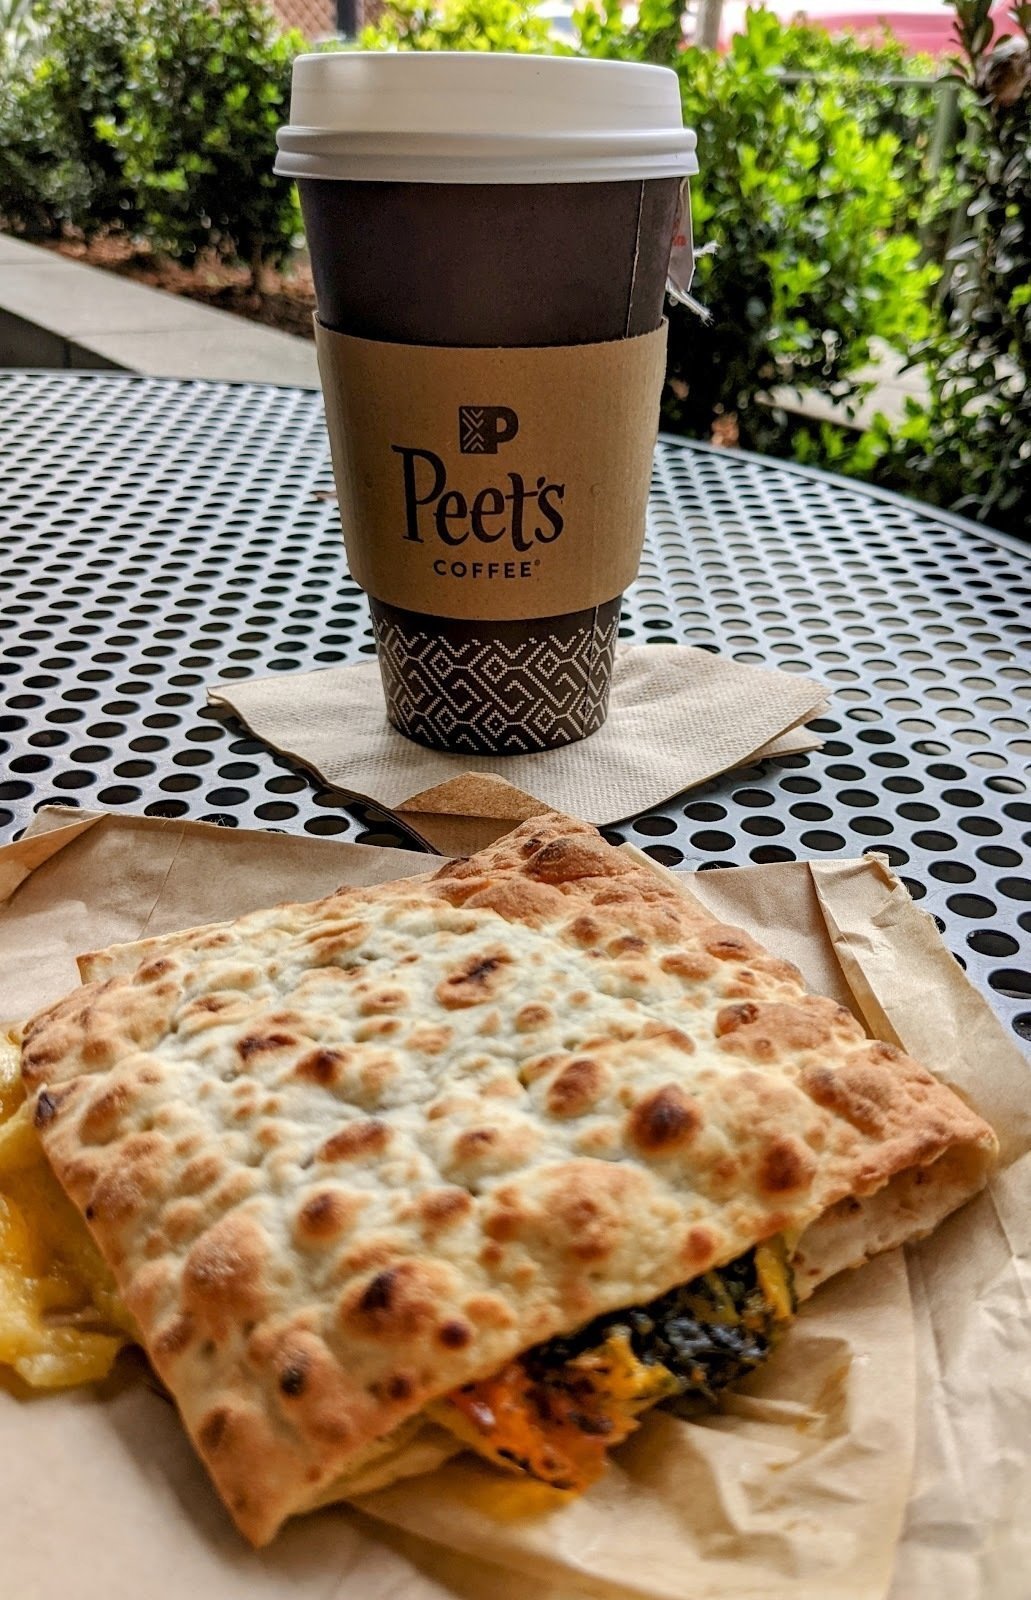 <span class="translation_missing" title="translation missing: en.meta.location_title, location_name: Peet&#39;s Coffee @ Broderick St, city: San Francisco">Location Title</span>